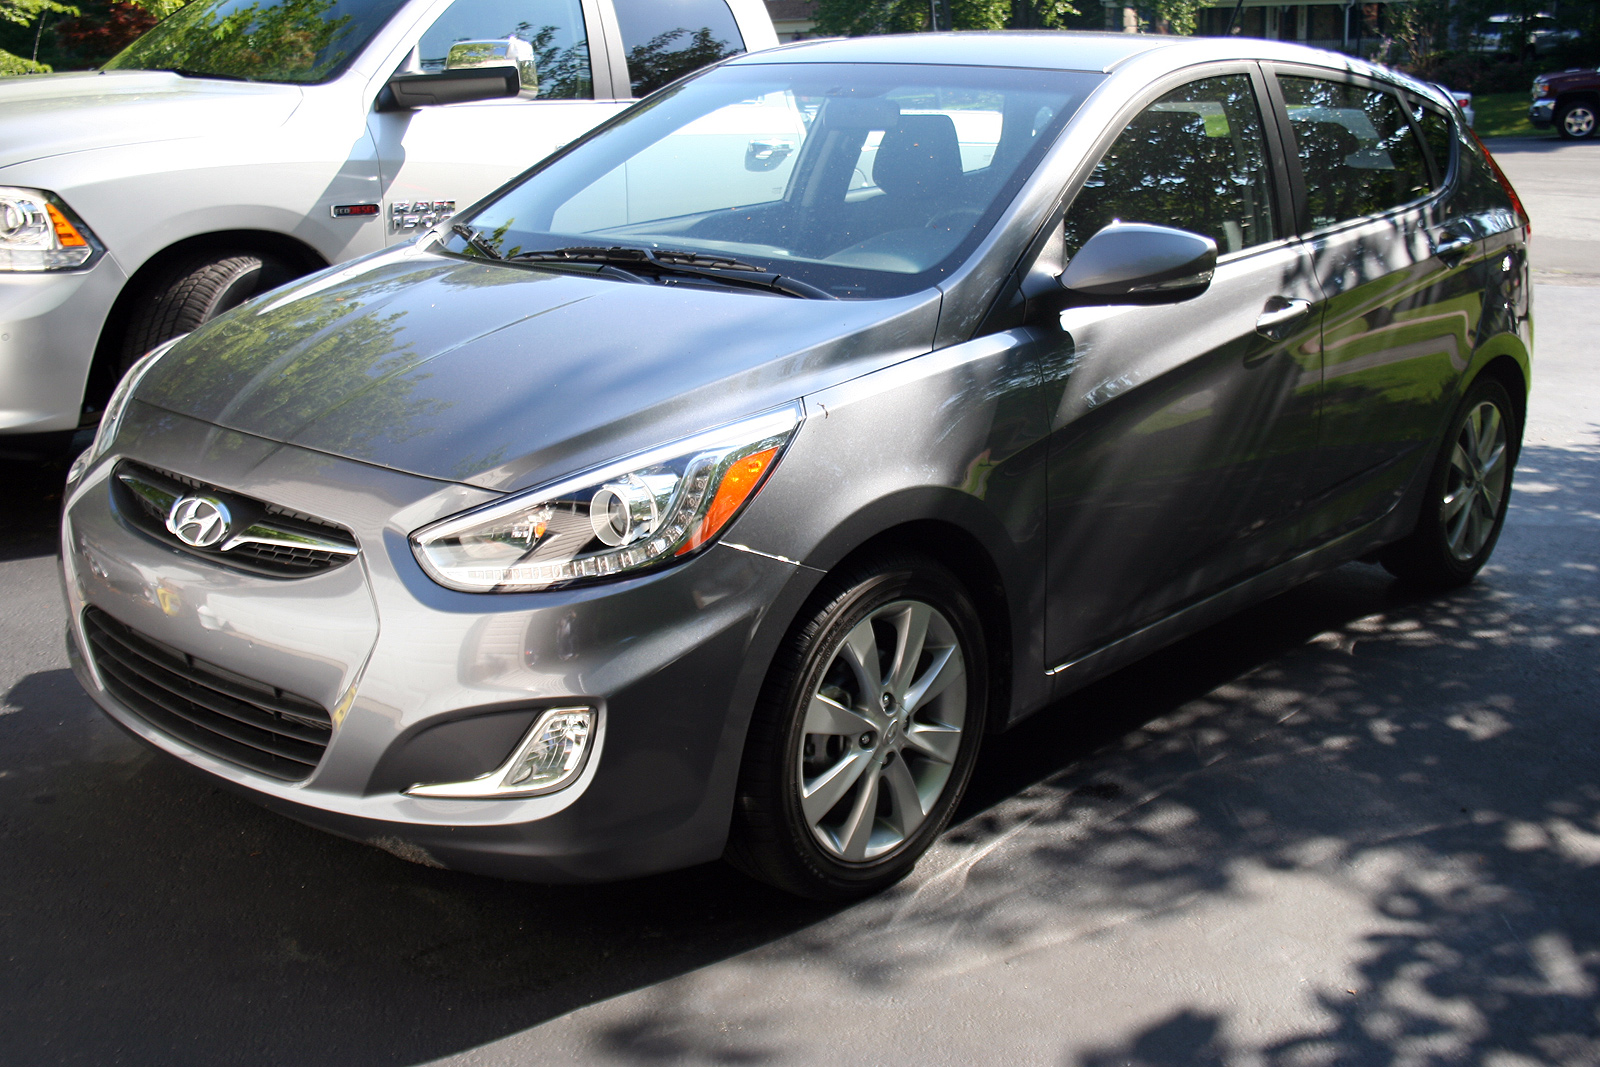 Car report: Hyundai Accent a subcompact that doesn’t feel cheap